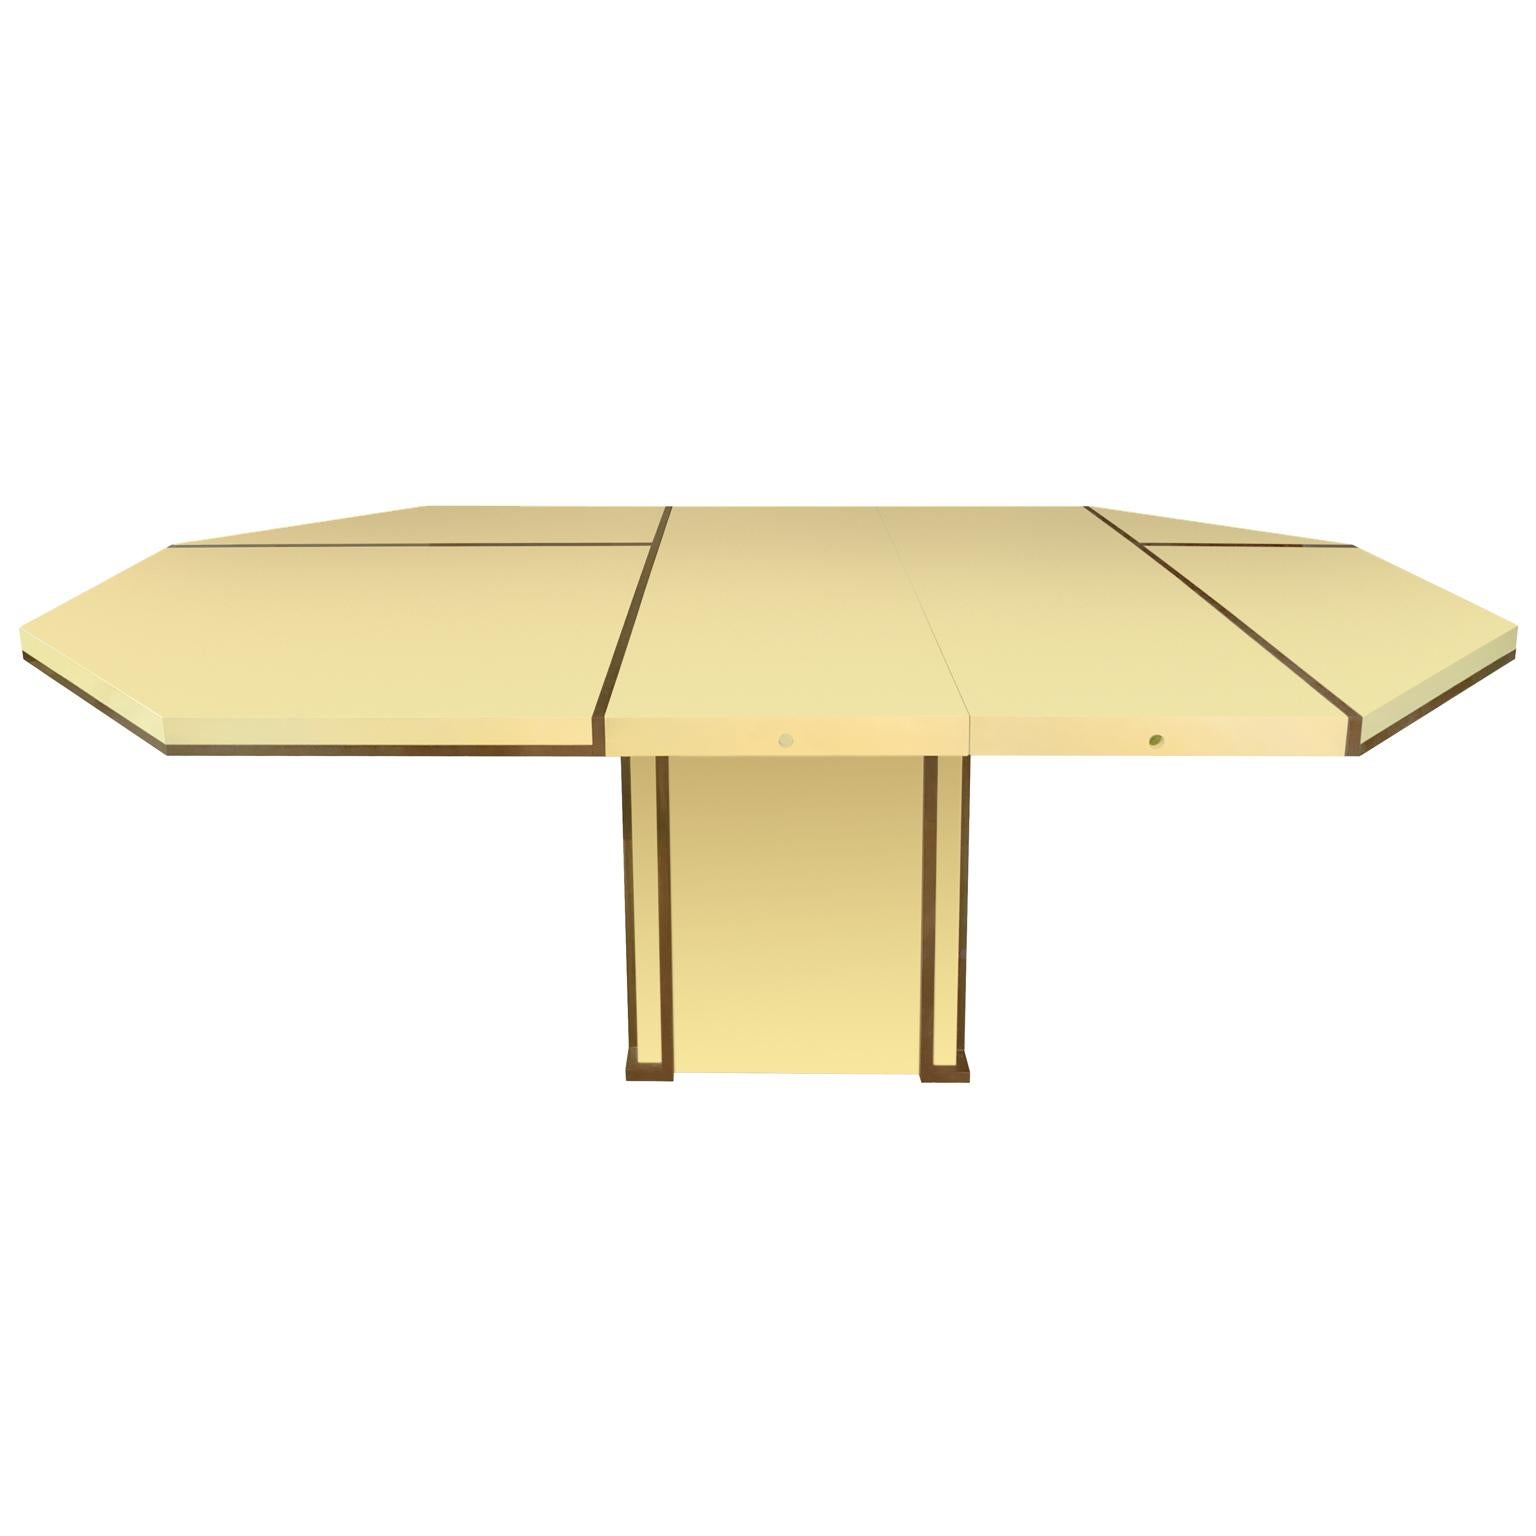 1970s French Octagonal Ivory Lacquer Extendable Dining Table with Brass Inlay 1